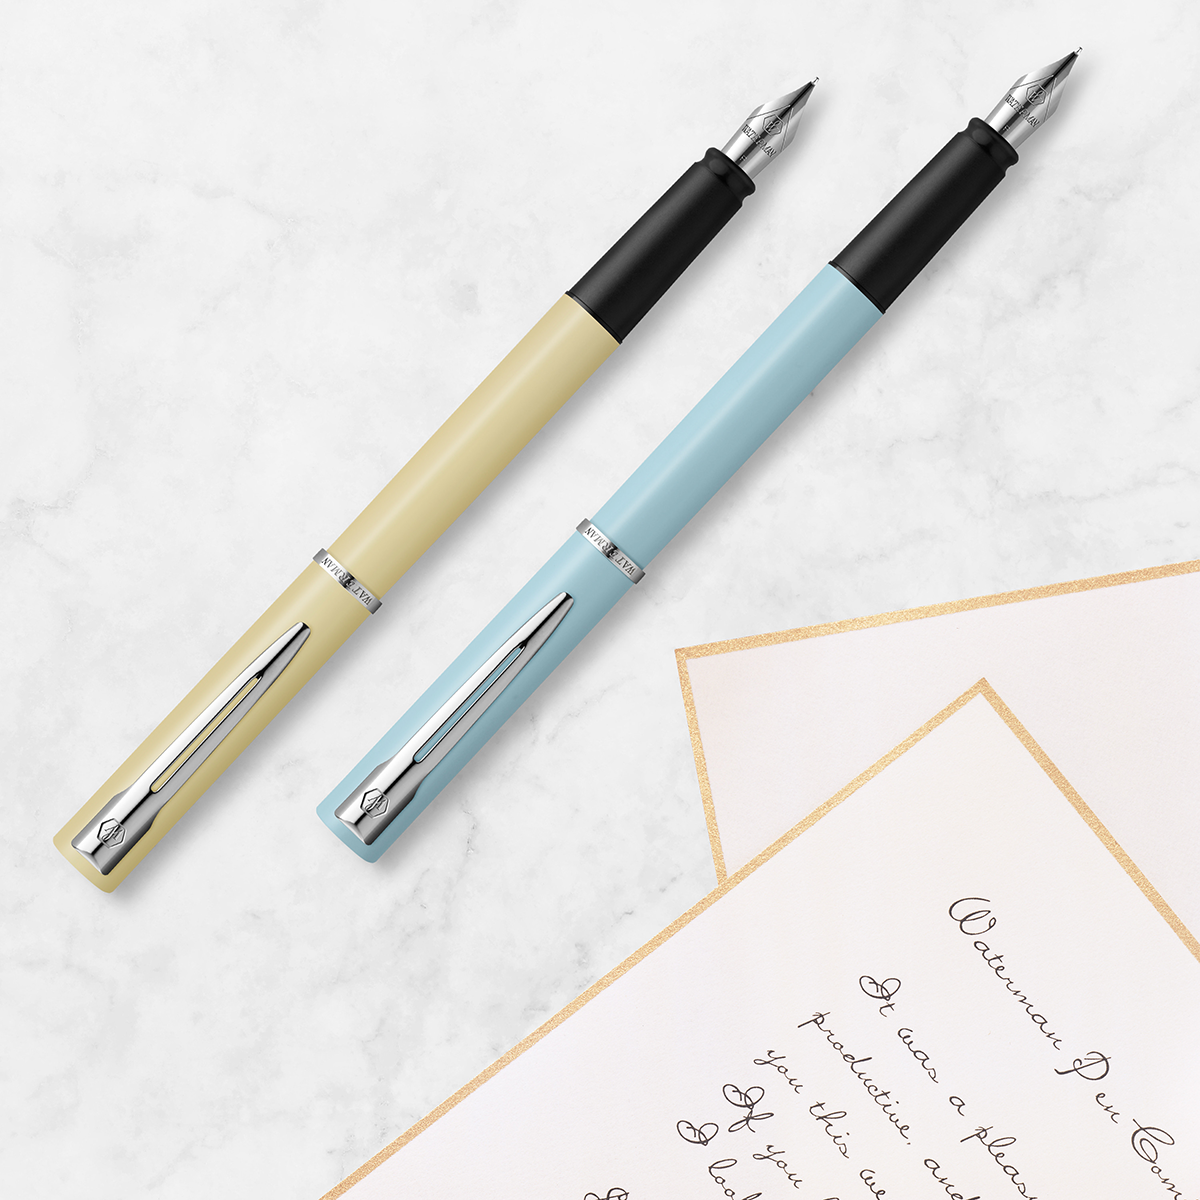 Allure Pastel Blue Fountain Pen in the group Pens / Fine Writing / Fountain Pens at Pen Store (128033)